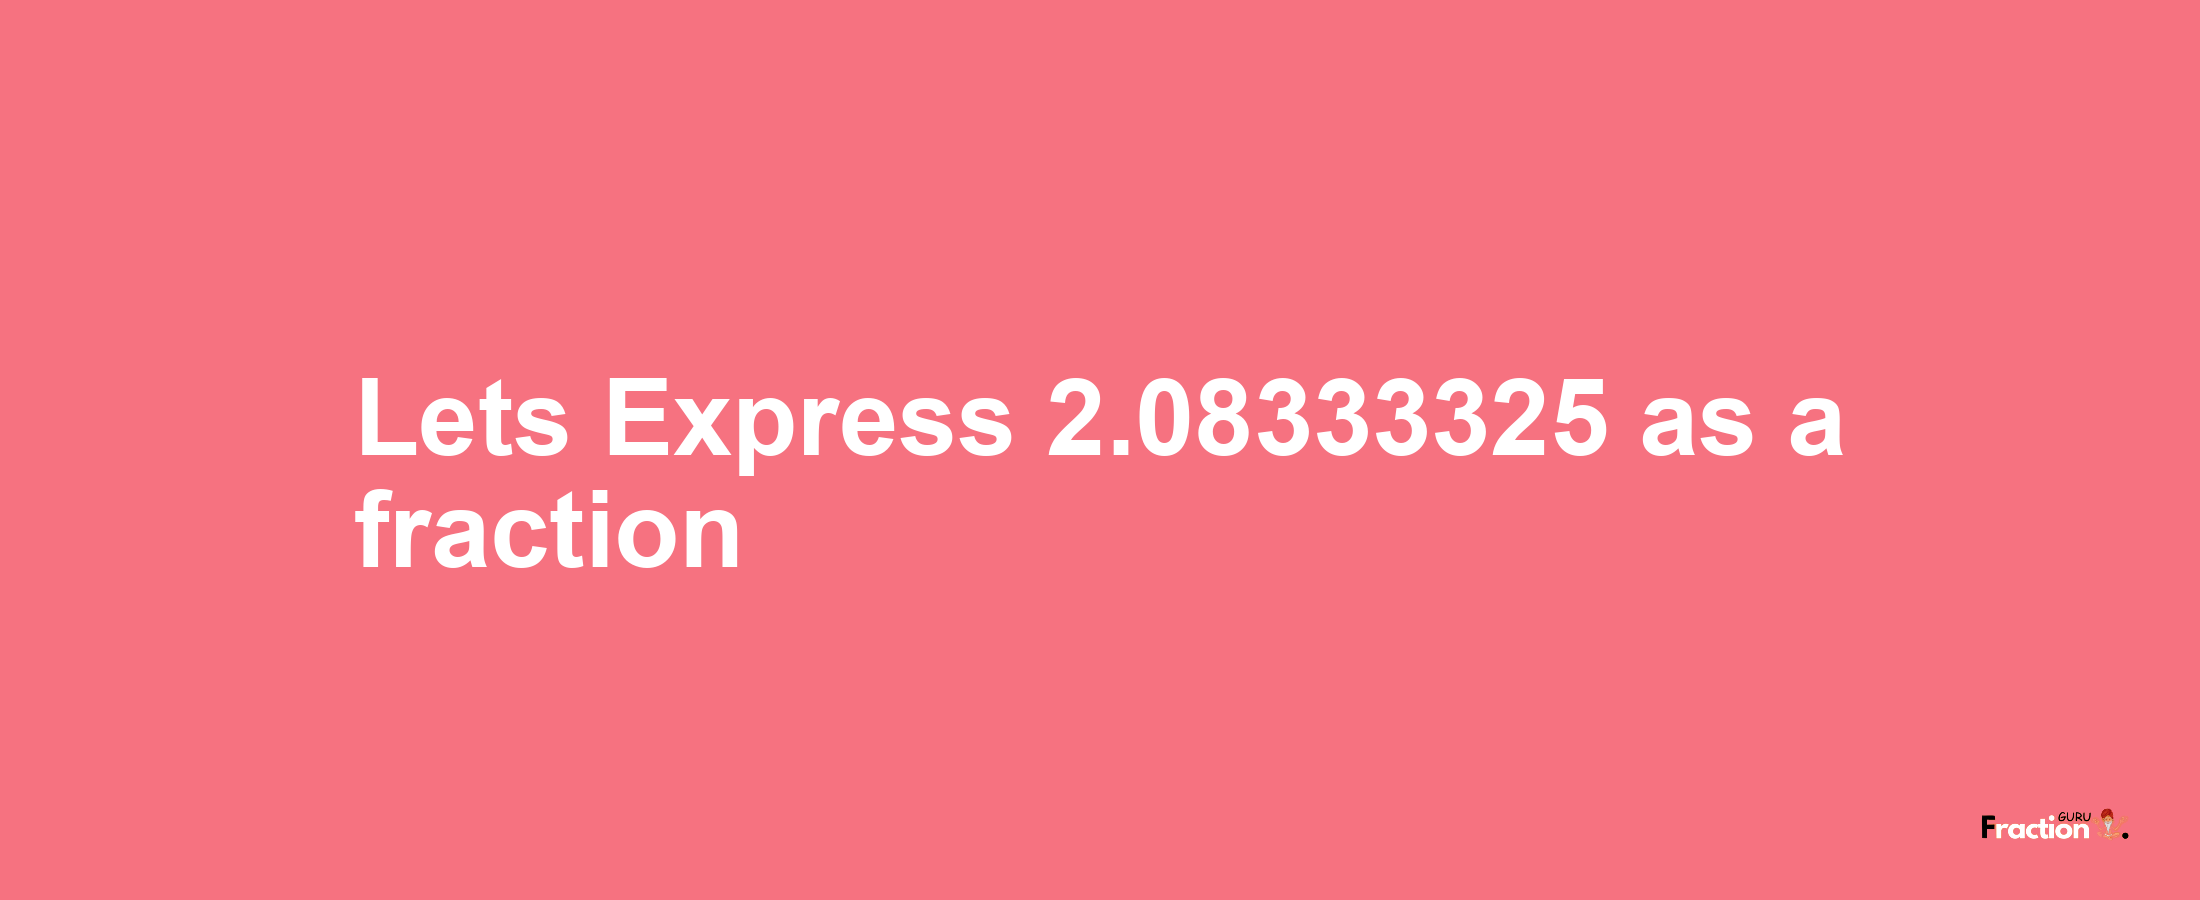 Lets Express 2.08333325 as afraction